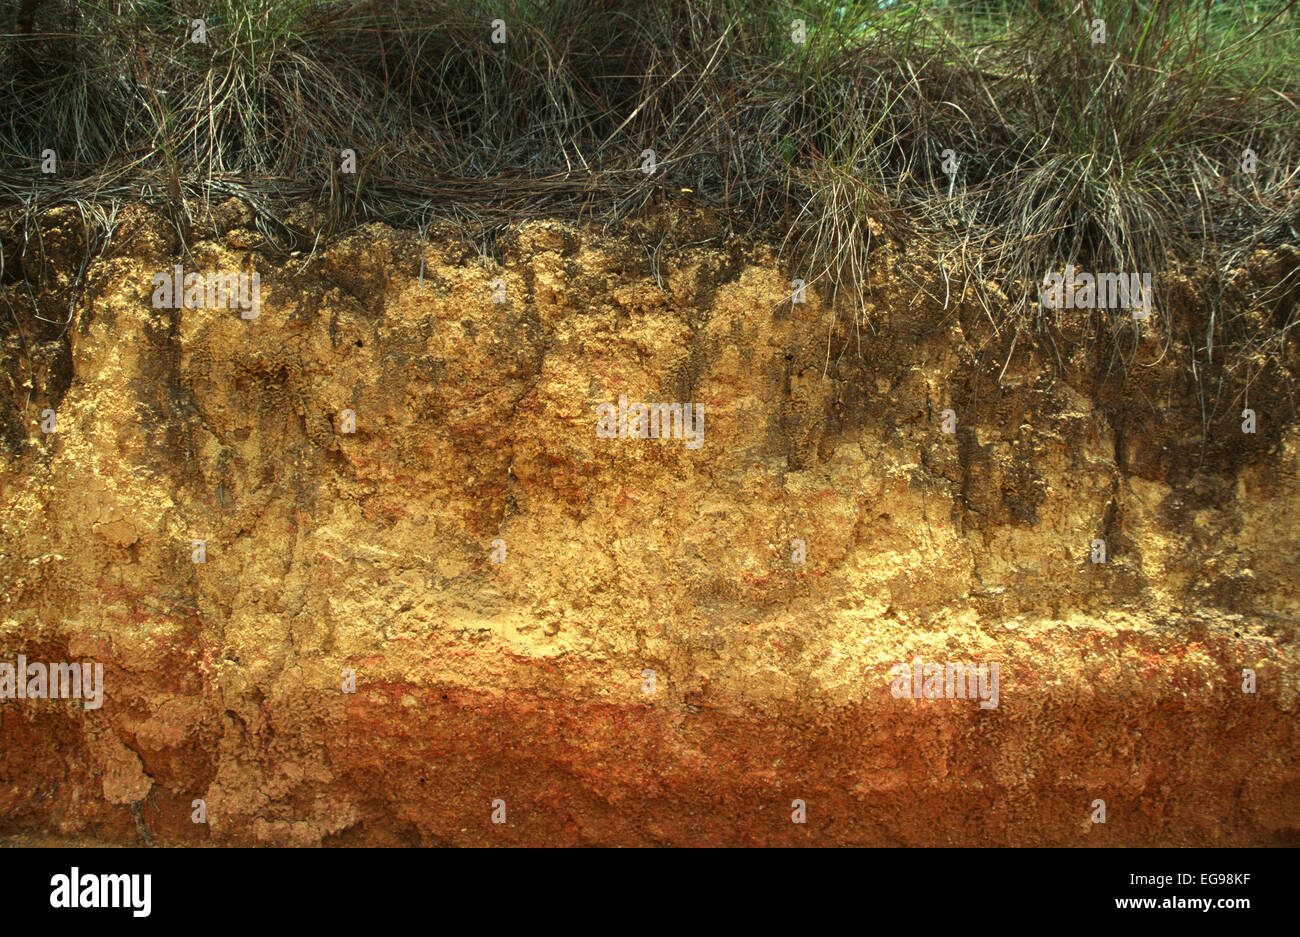 Ultisol soil profile in tropical pine savanna ecosystem showing A horizon and B horizon in Belize, Central America Stock Photo